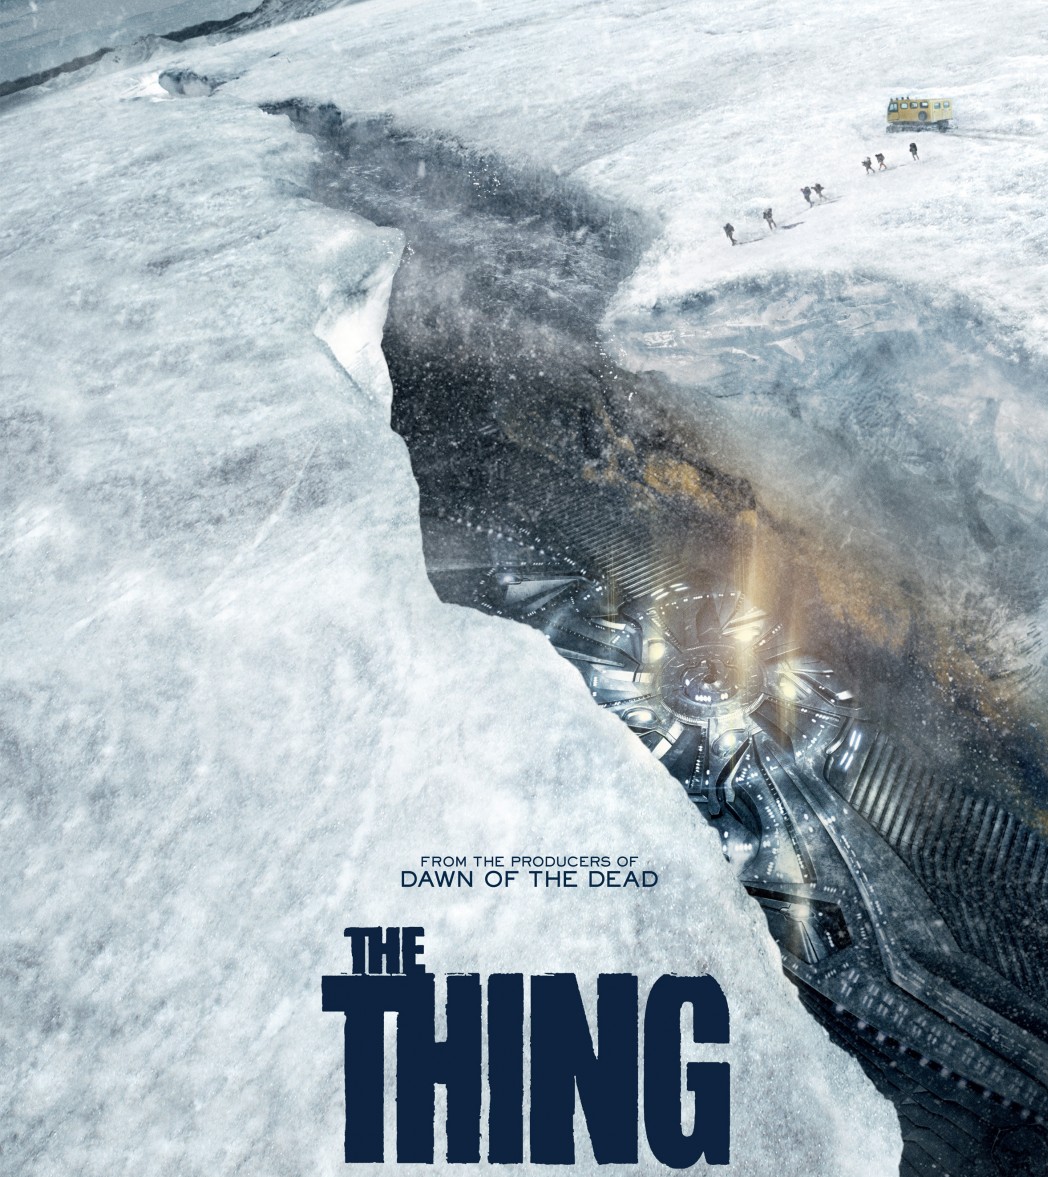 vec_the_thing_prequel_2011_poster